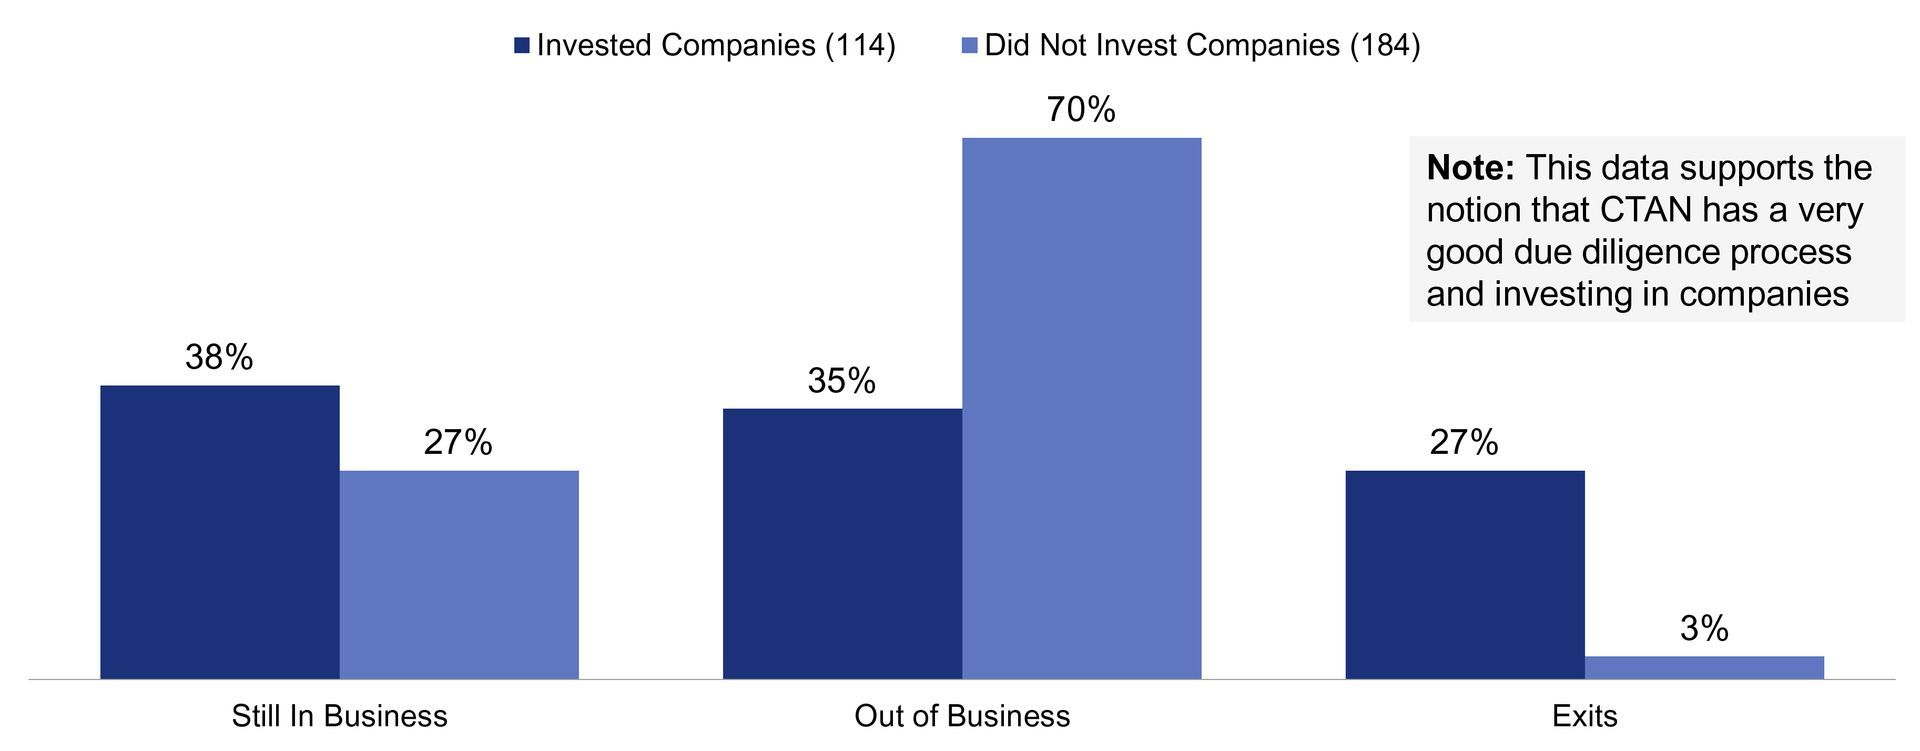 CTAN Review of Companies Invested and Received Due Diligence Versus Companies that We Did Not Invest and No Due Diligence Was Performed - Q4 2011 through 2018